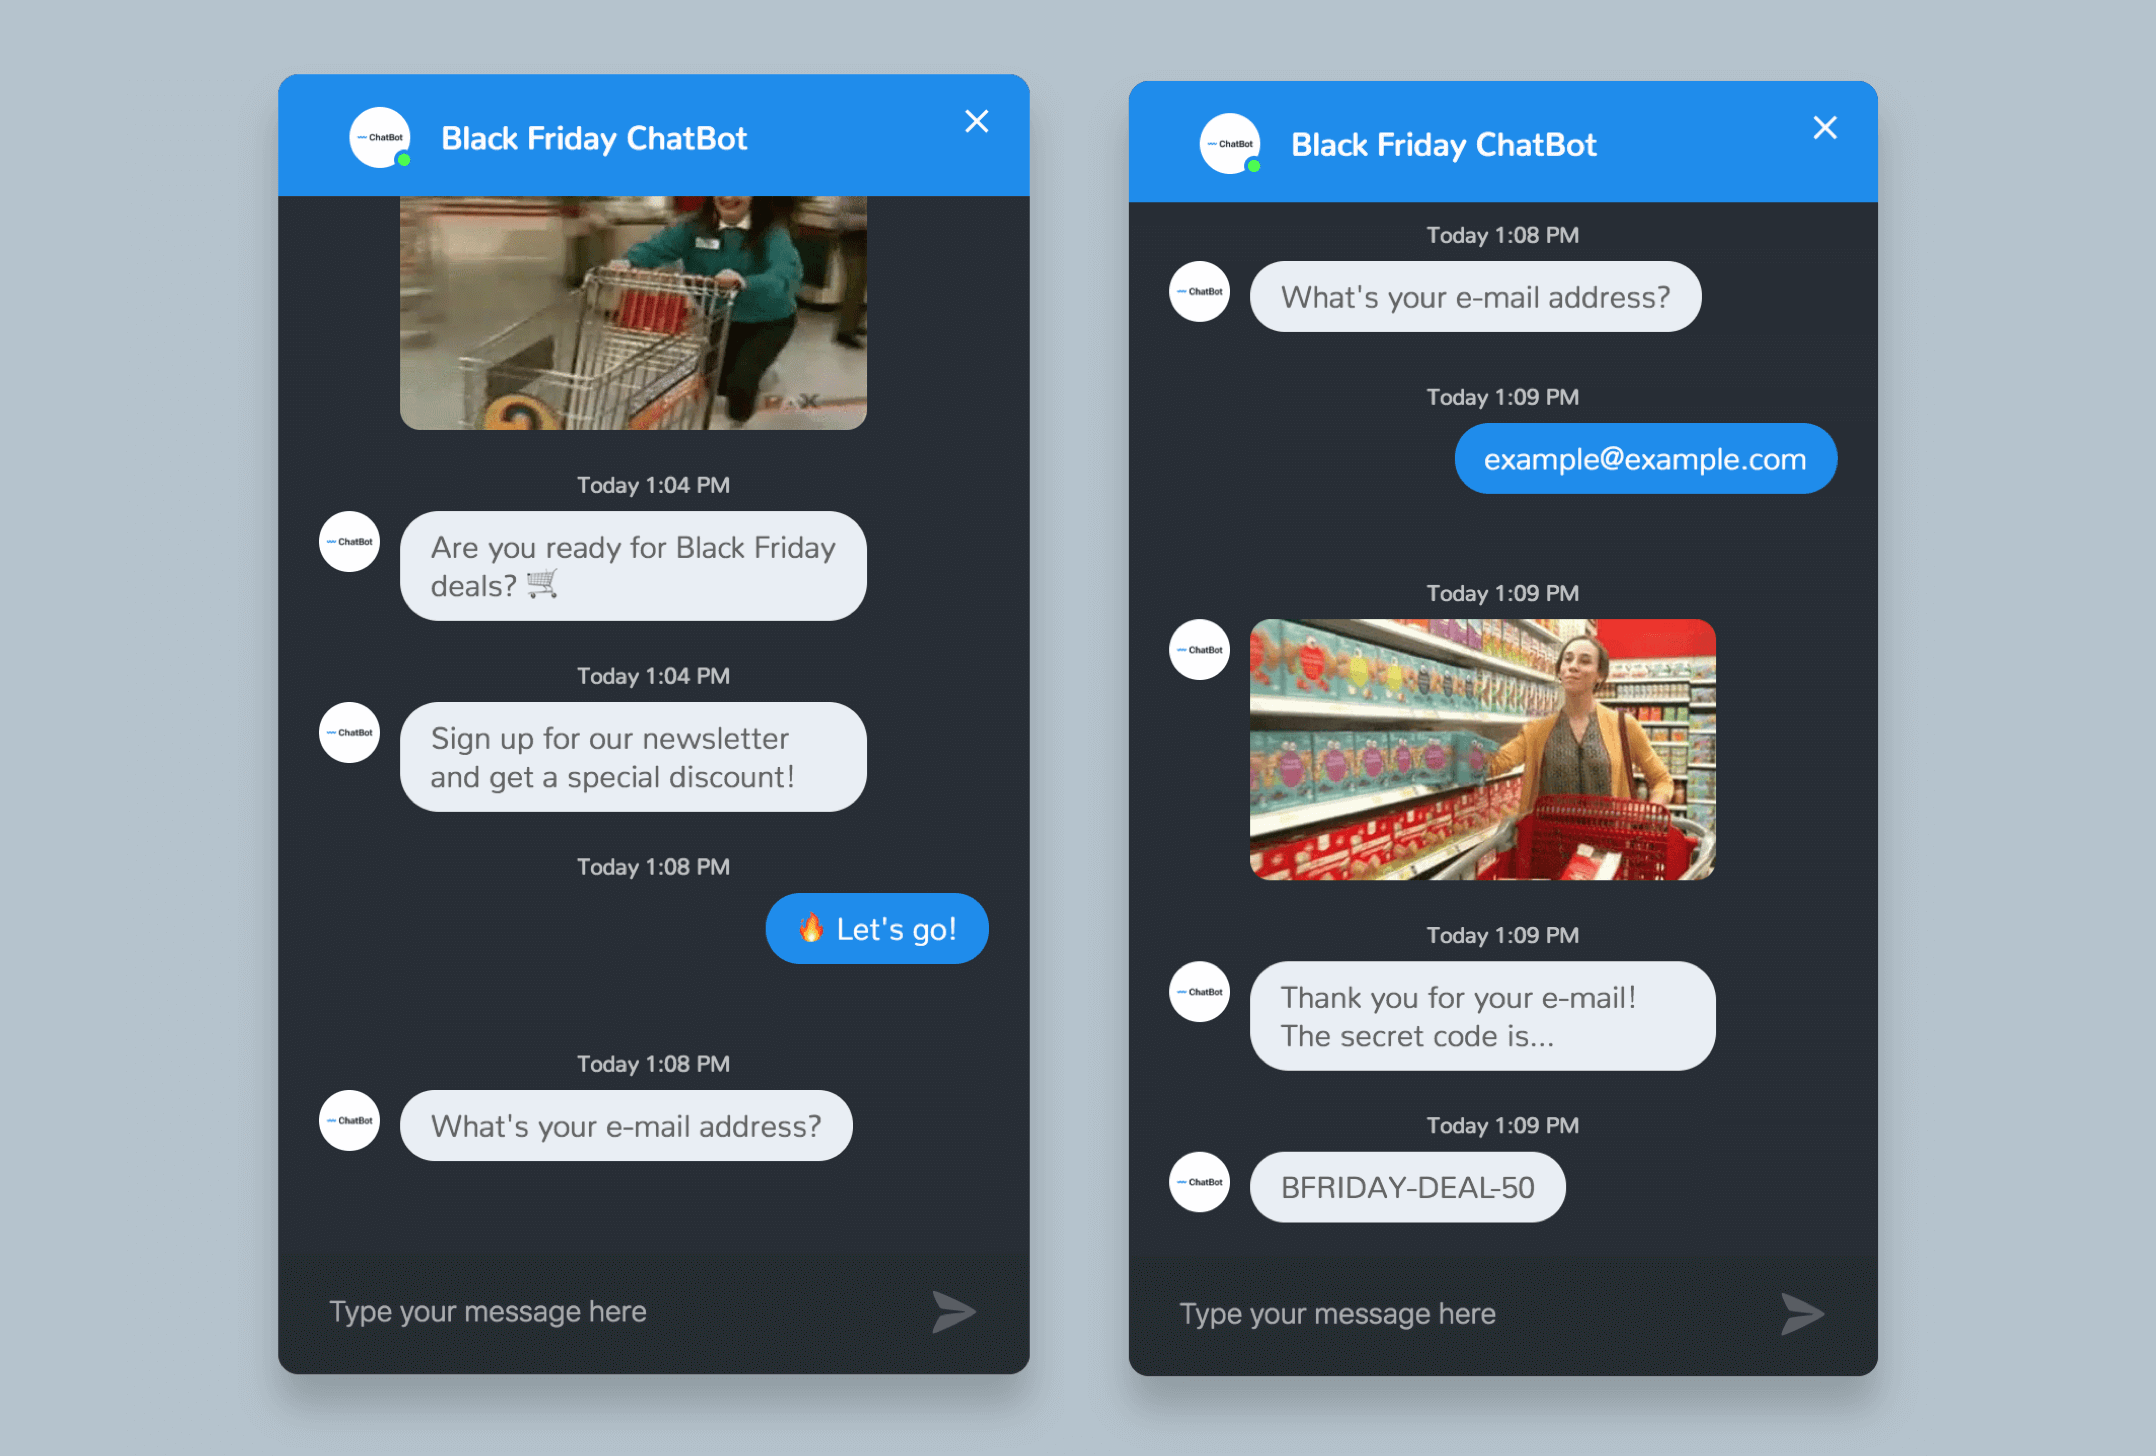 Promote your discounts using chat bots - ChatBot template for Black Friday